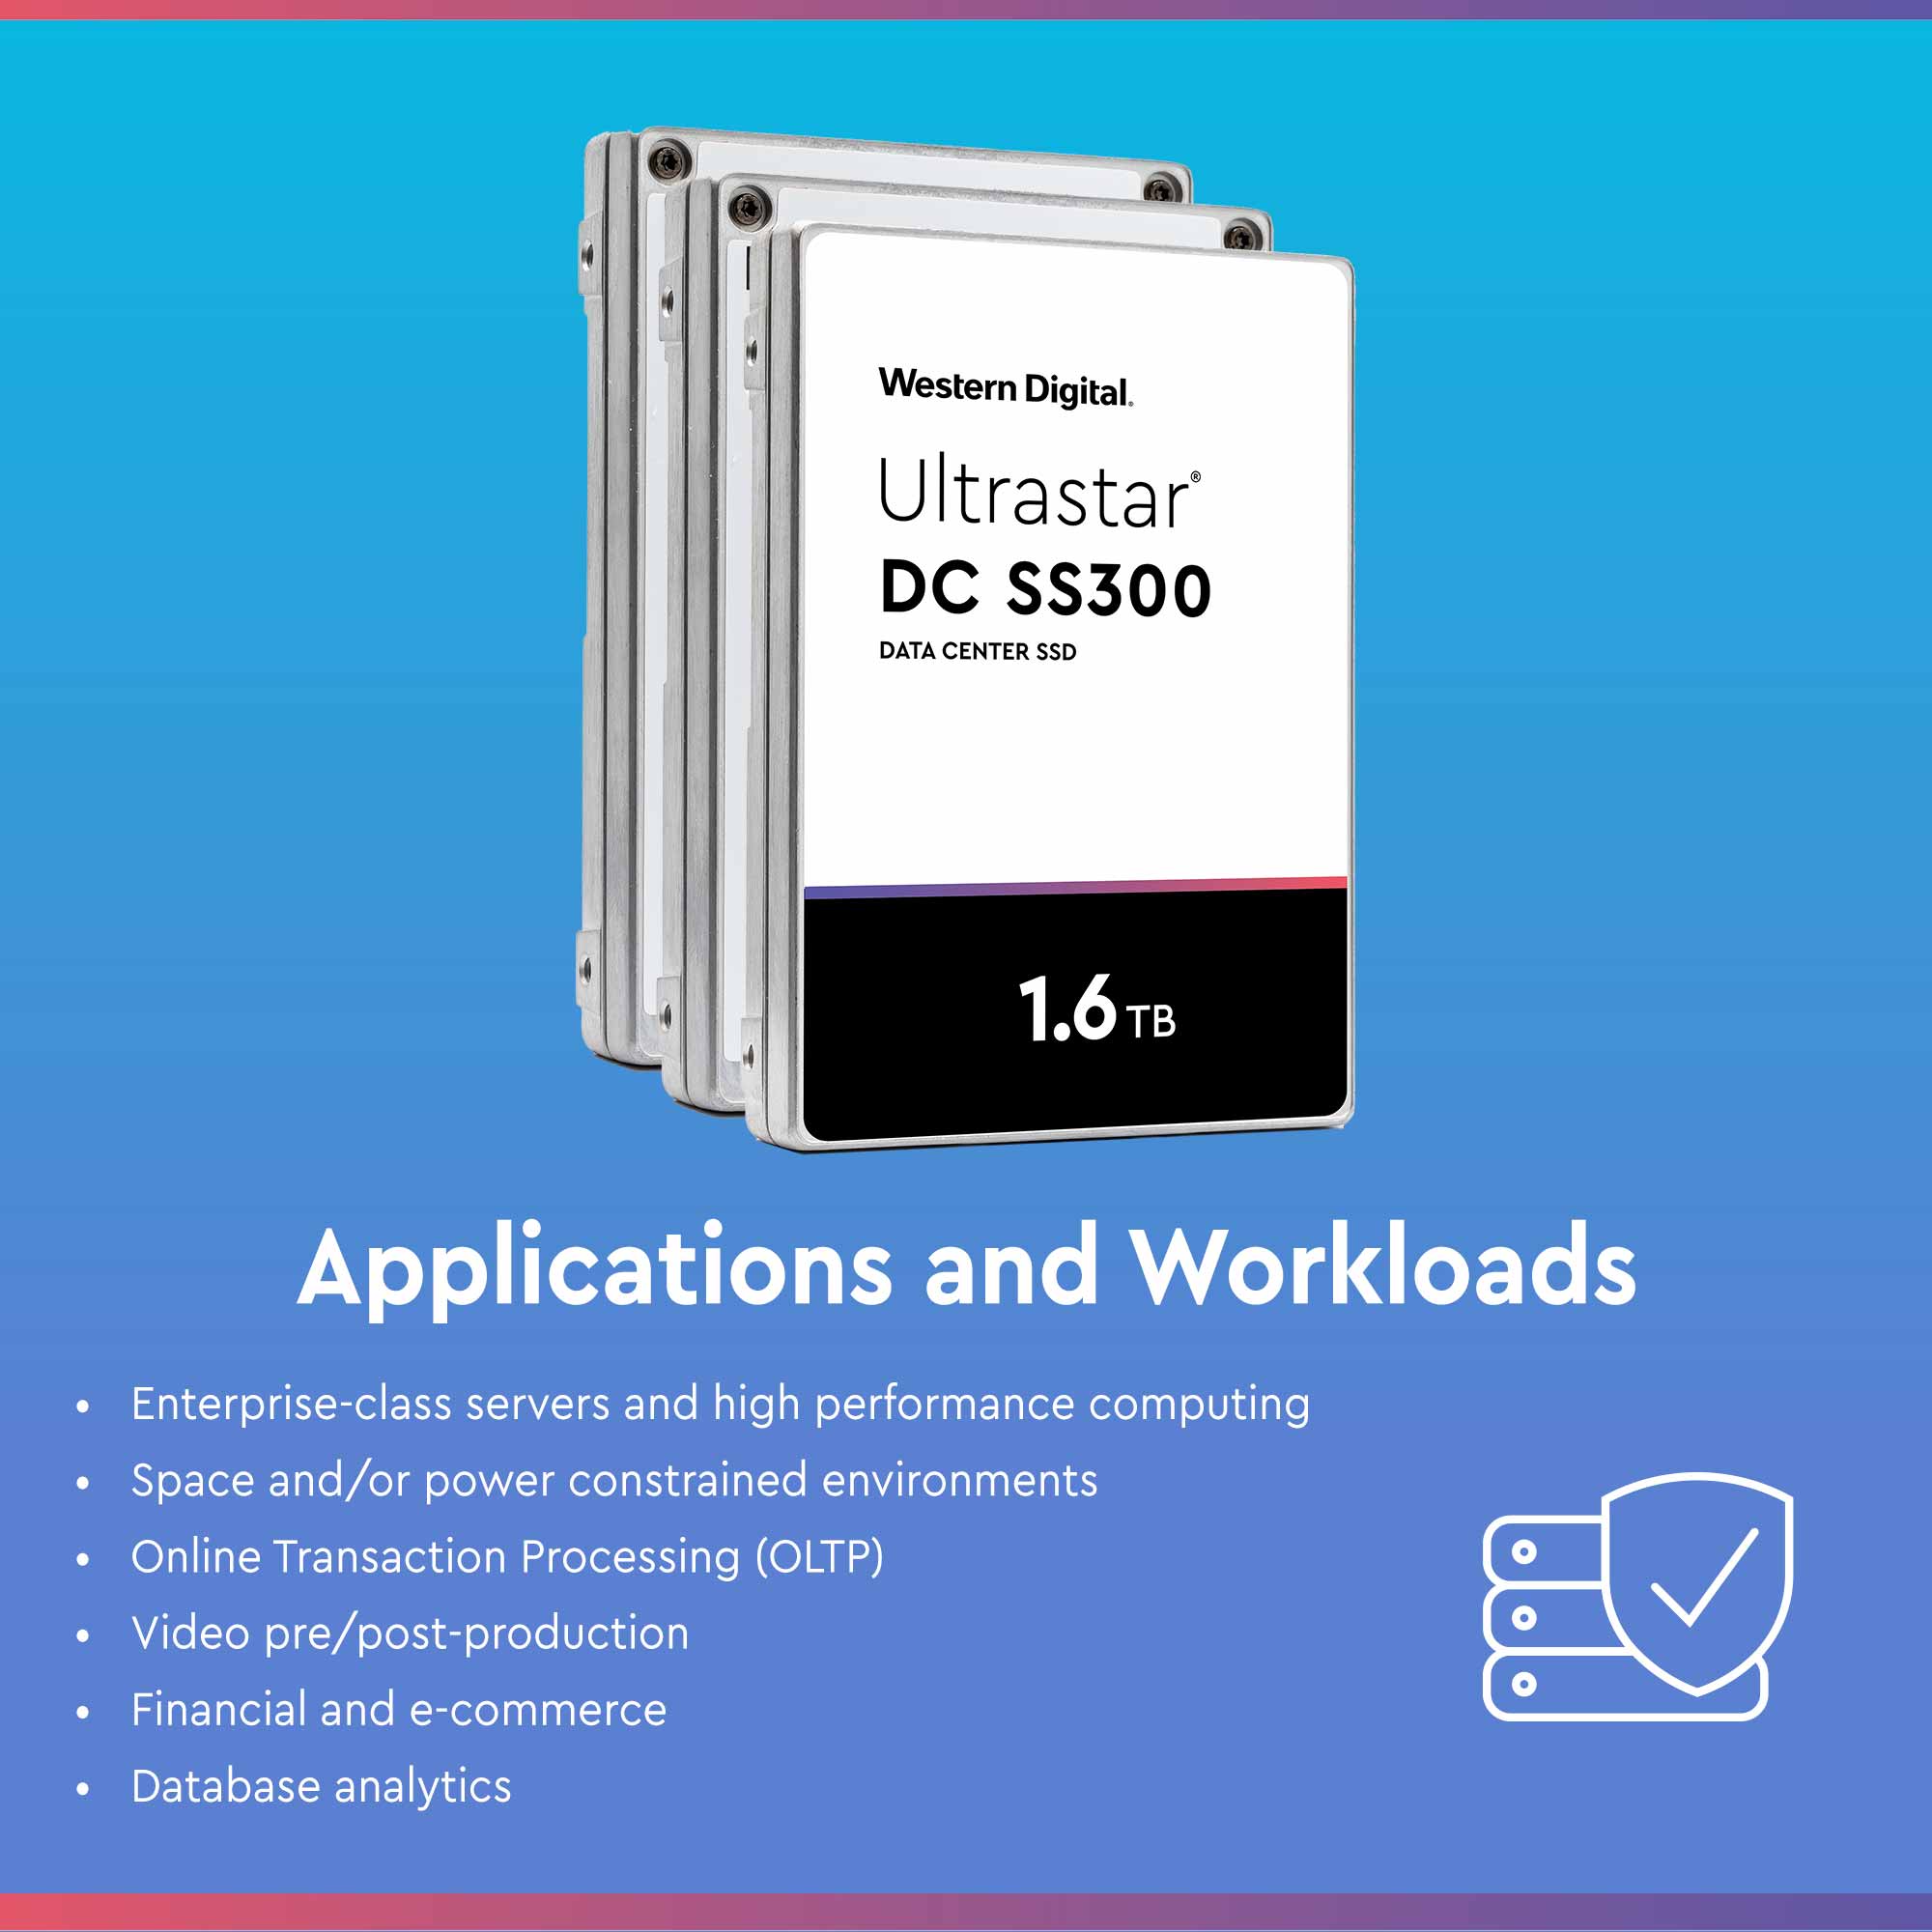 Western Digital DC SS300 HUSMM3216ASS204 1.6TB SAS 12Gb/s 512e 2.5in Recertified Solid State Drive - Applications and Workloads